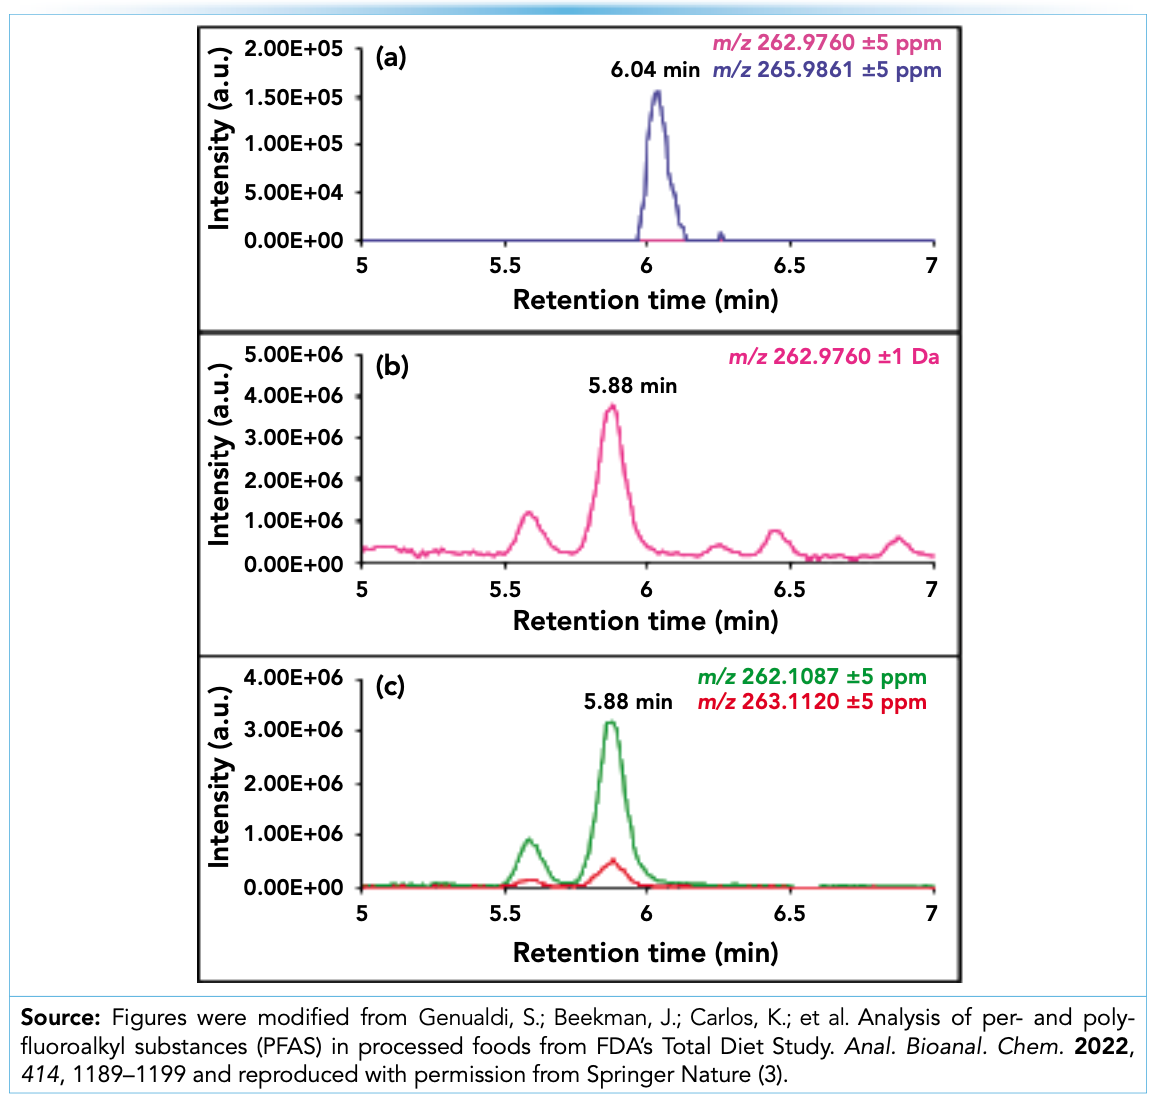 FIGURE 1: LC–HRMS EICs generated from a chocolate chip cookie sample for (a) PFPeA (pink; m/z 262.9760 ± 5 ppm) and the labeled PFPeA surrogate (blue; m/z 265.9861 ± 5 ppm); (b) PFPeA m/z 262.9760 ± 1 Da; and (c) the suspected interferent at m/z 262.1087 ± 5 ppm (green) and its associated 13C isotope (red; m/z 263.1120 ± 5 ppm).